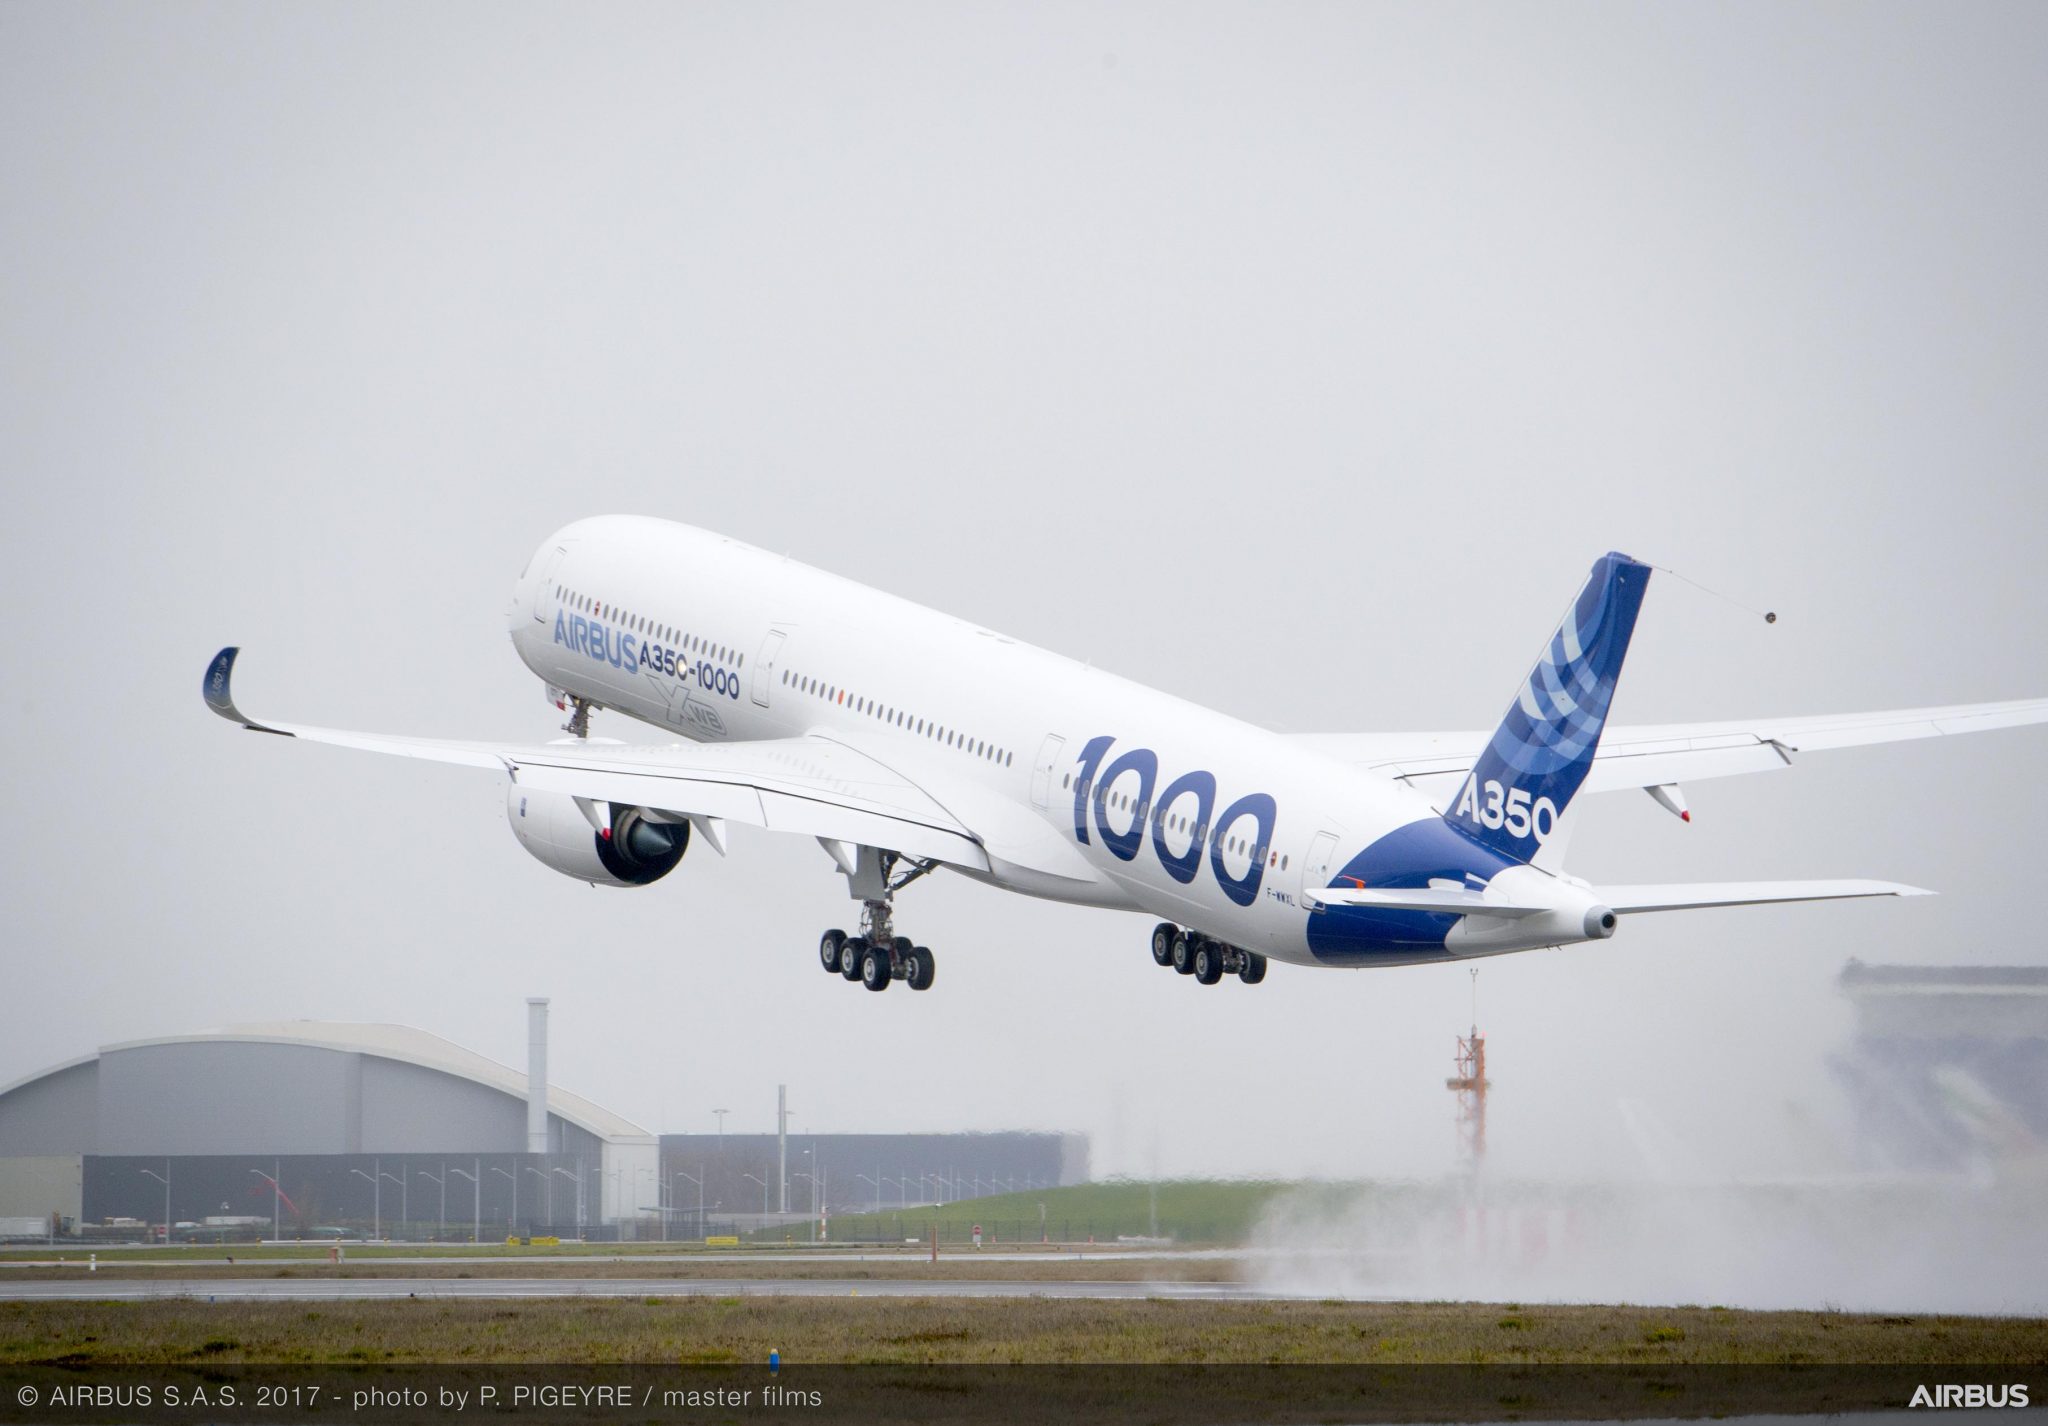 Exelis wins Airbus A350-1000 contract